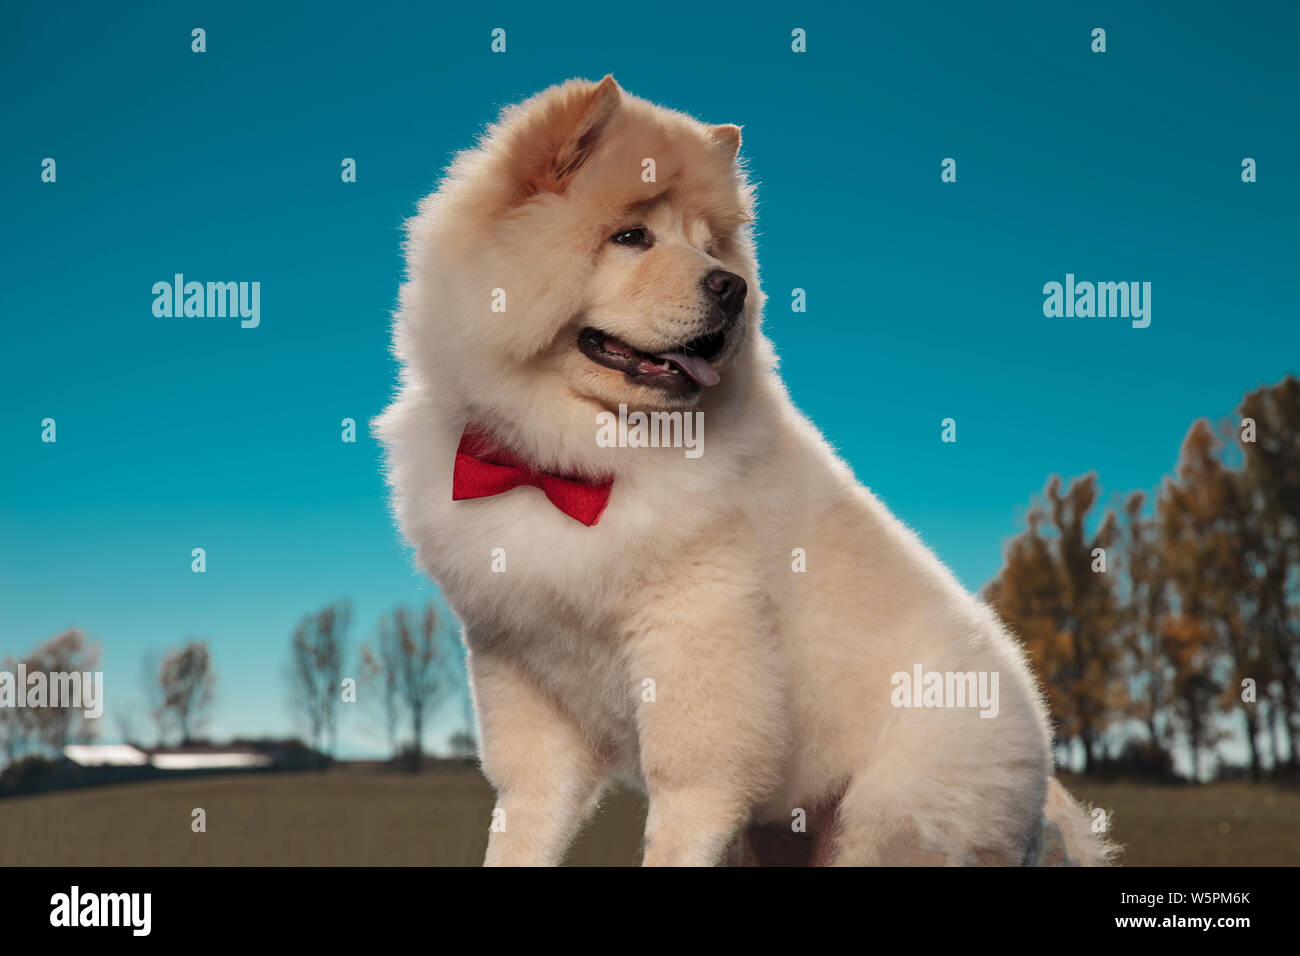 adorable little chow chow puppy dog looks back over its shoulder against outdoor background Stock Photo